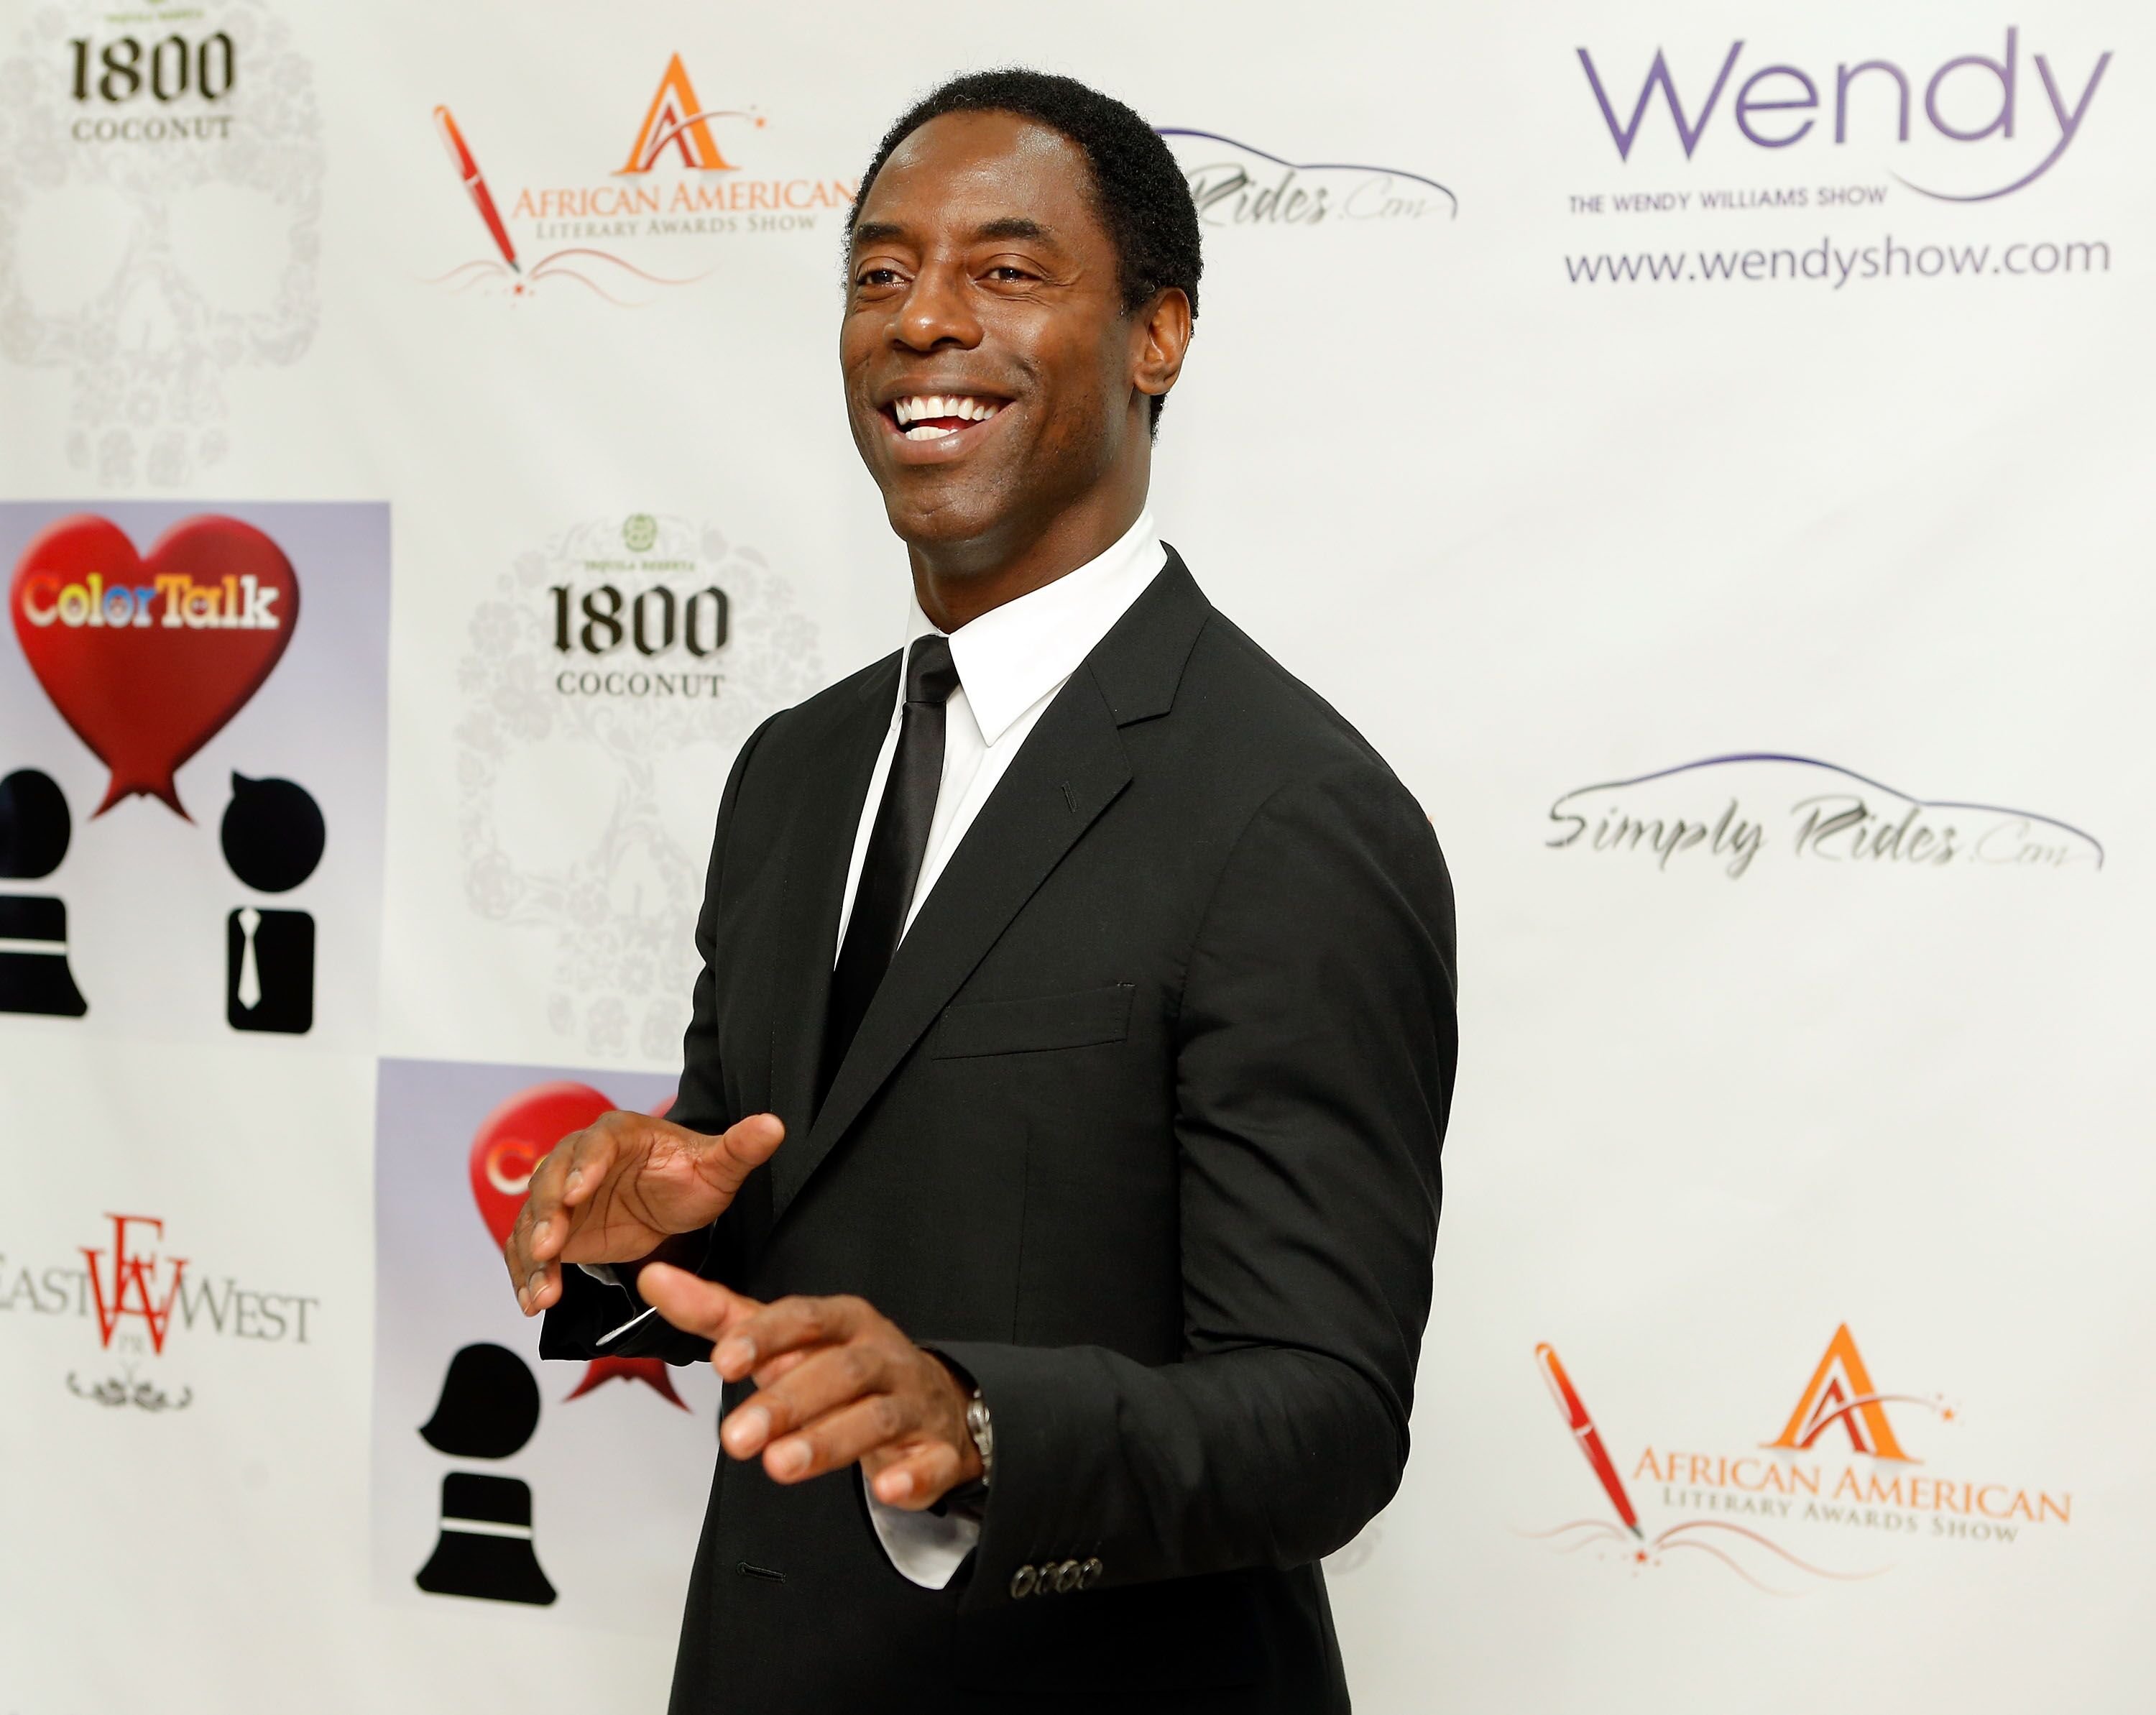 Actor/author Isaiah Washington attends the 8th Annual African American Literary Awards. | Source: Getty Images